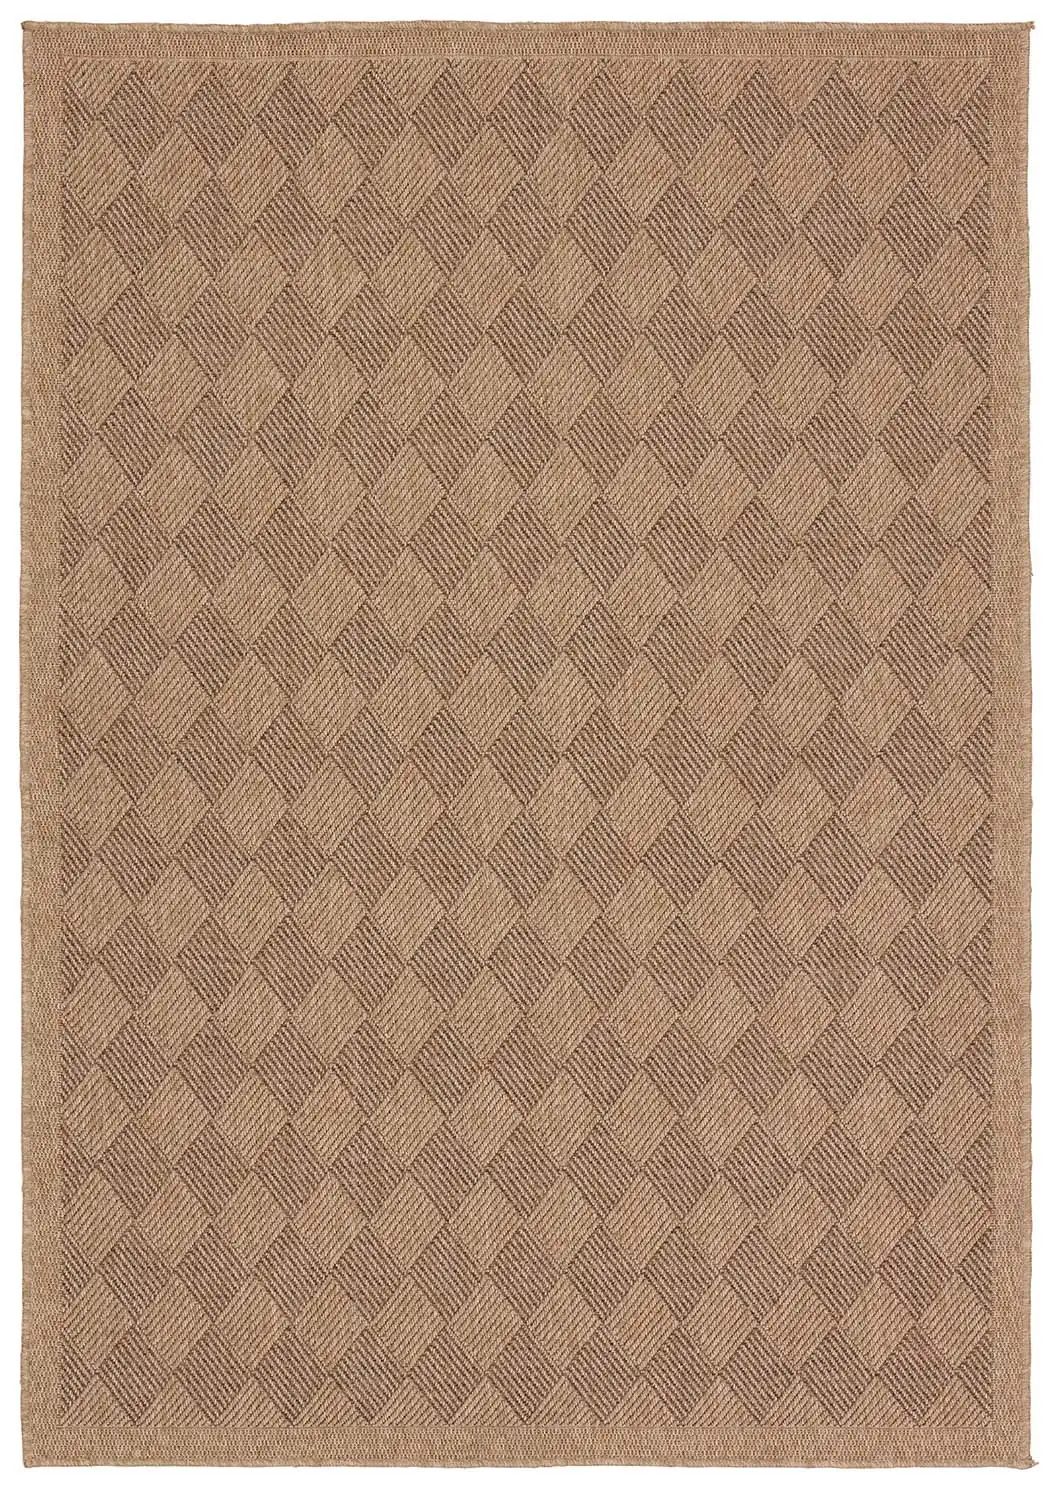 Vibe by Jaipur Living Amanar Indoor/Outdoor Tribal Brown Area Rug  Product Image